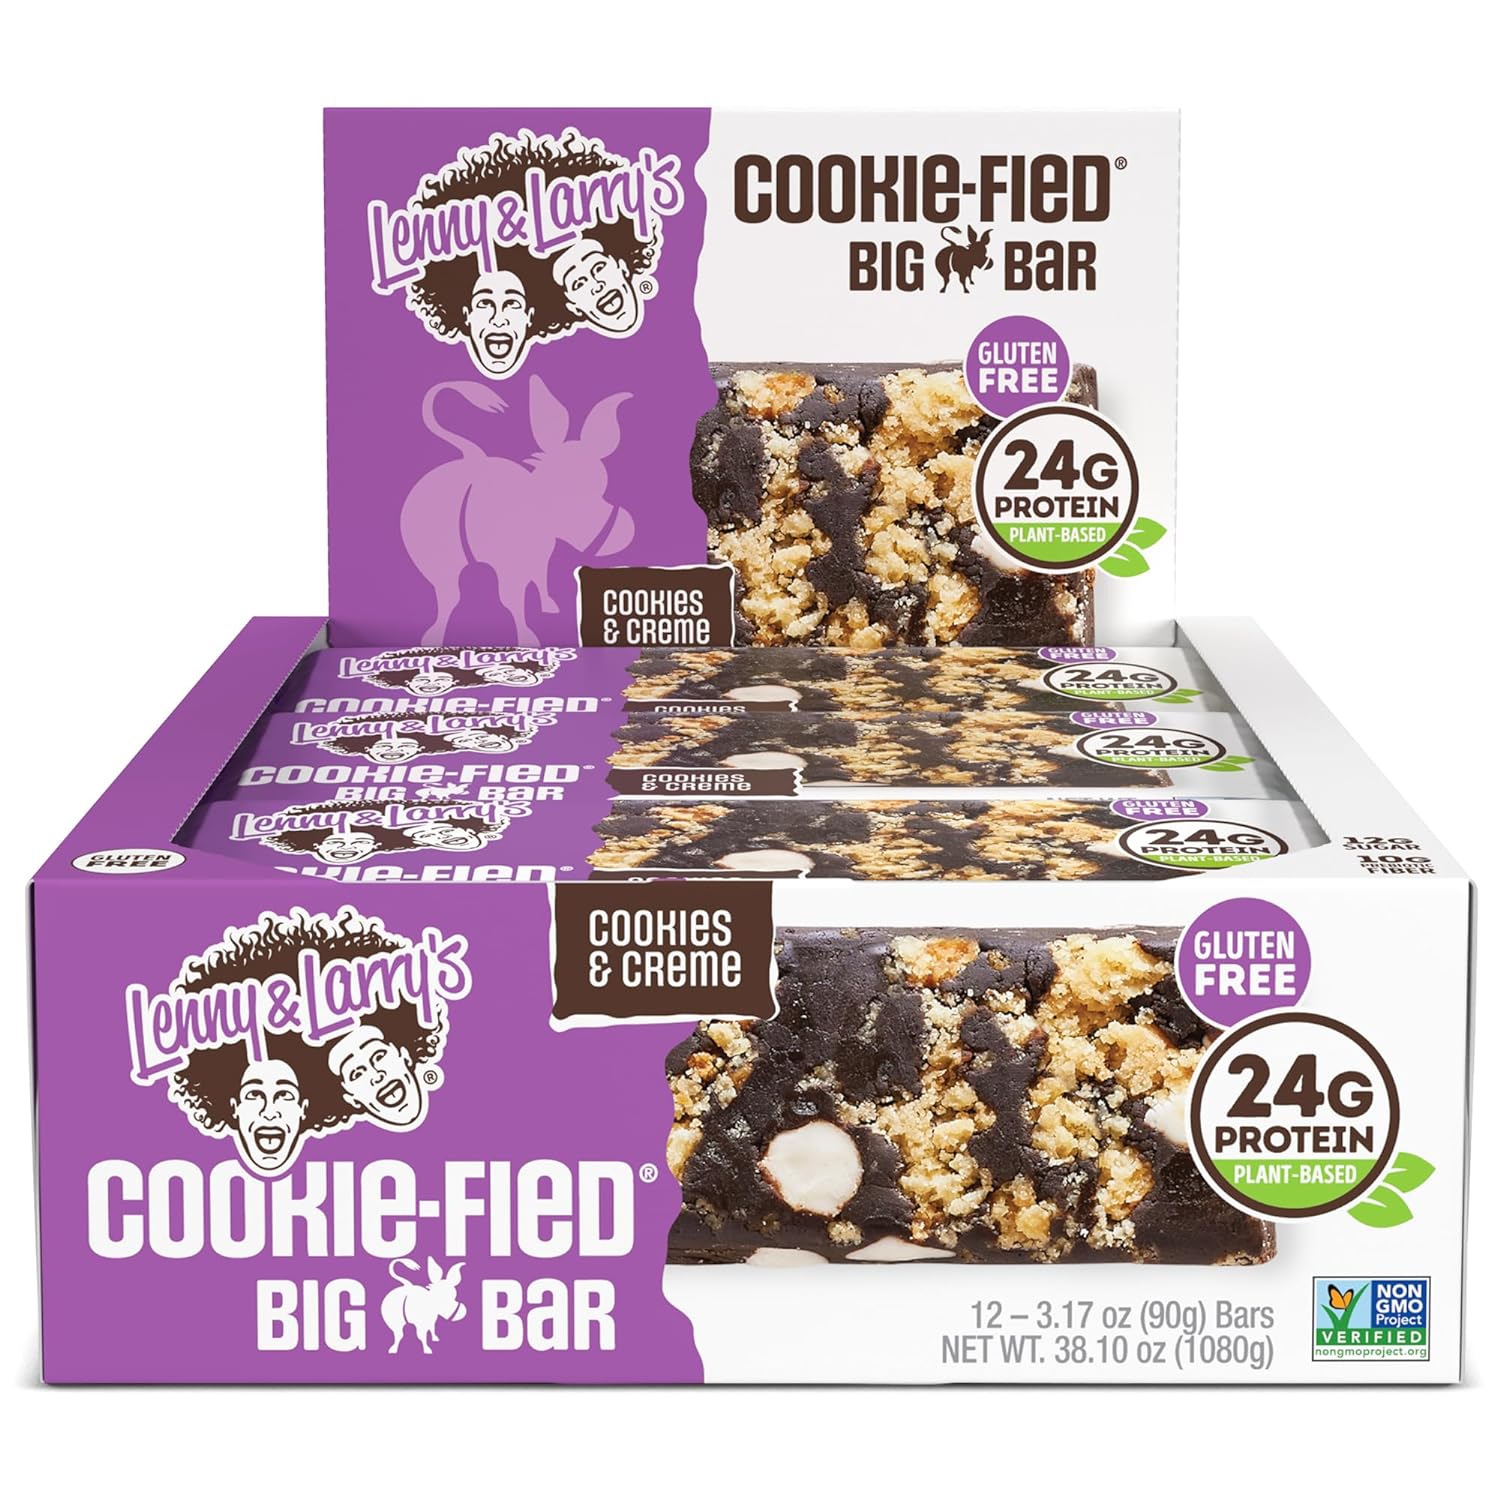 Lenny & Larry's Cookie-fied BIG BAR 90g, Cookies and Creme, 12-pack with 24 grams of Plant-Based Protein Extra Large Vegan Snack Bars, 10g Prebiotic Fiber Non-GMO, Kosher